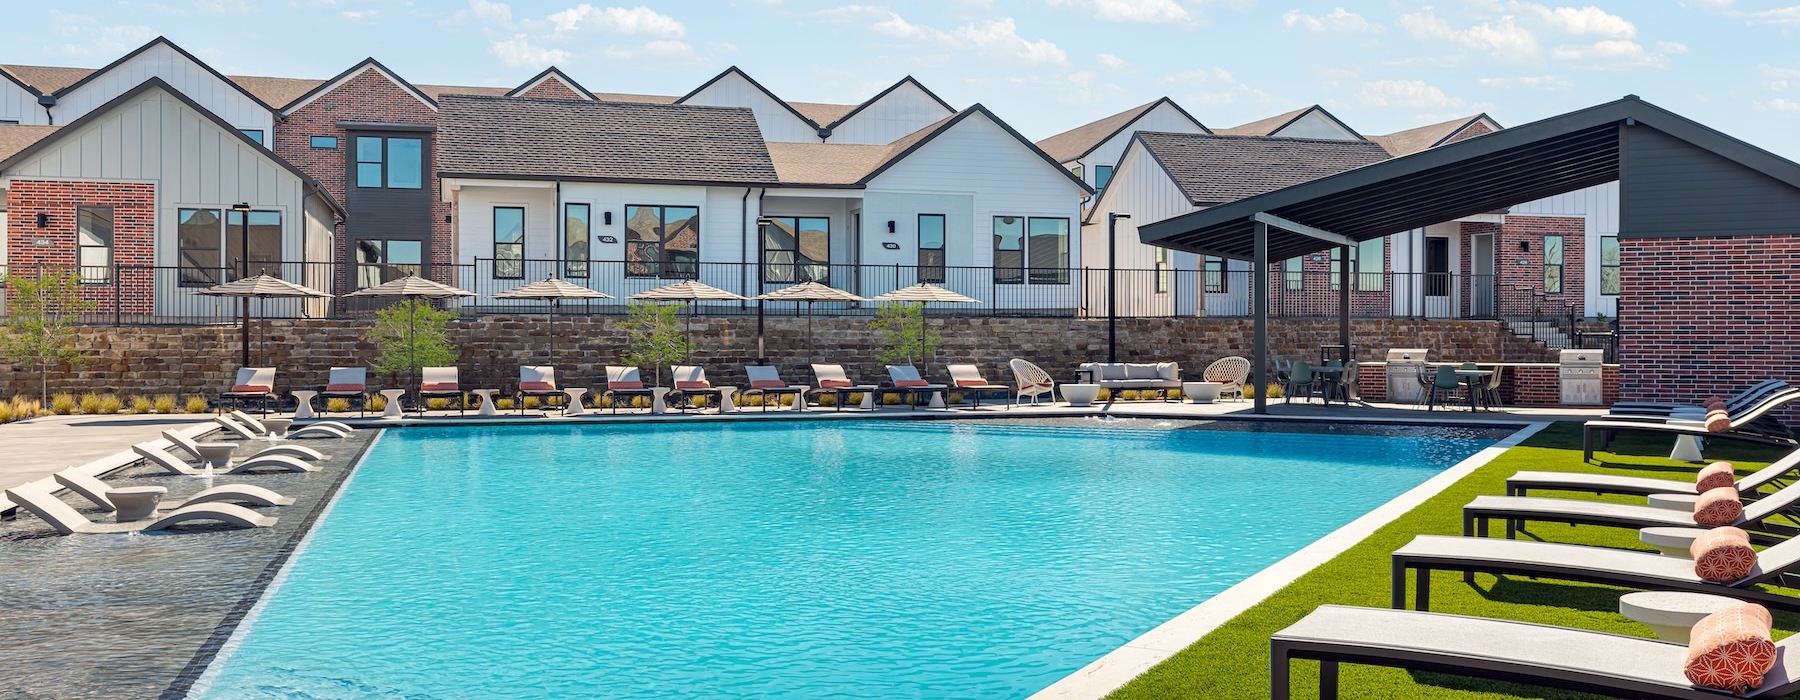 Rental homes in mckinney with pool